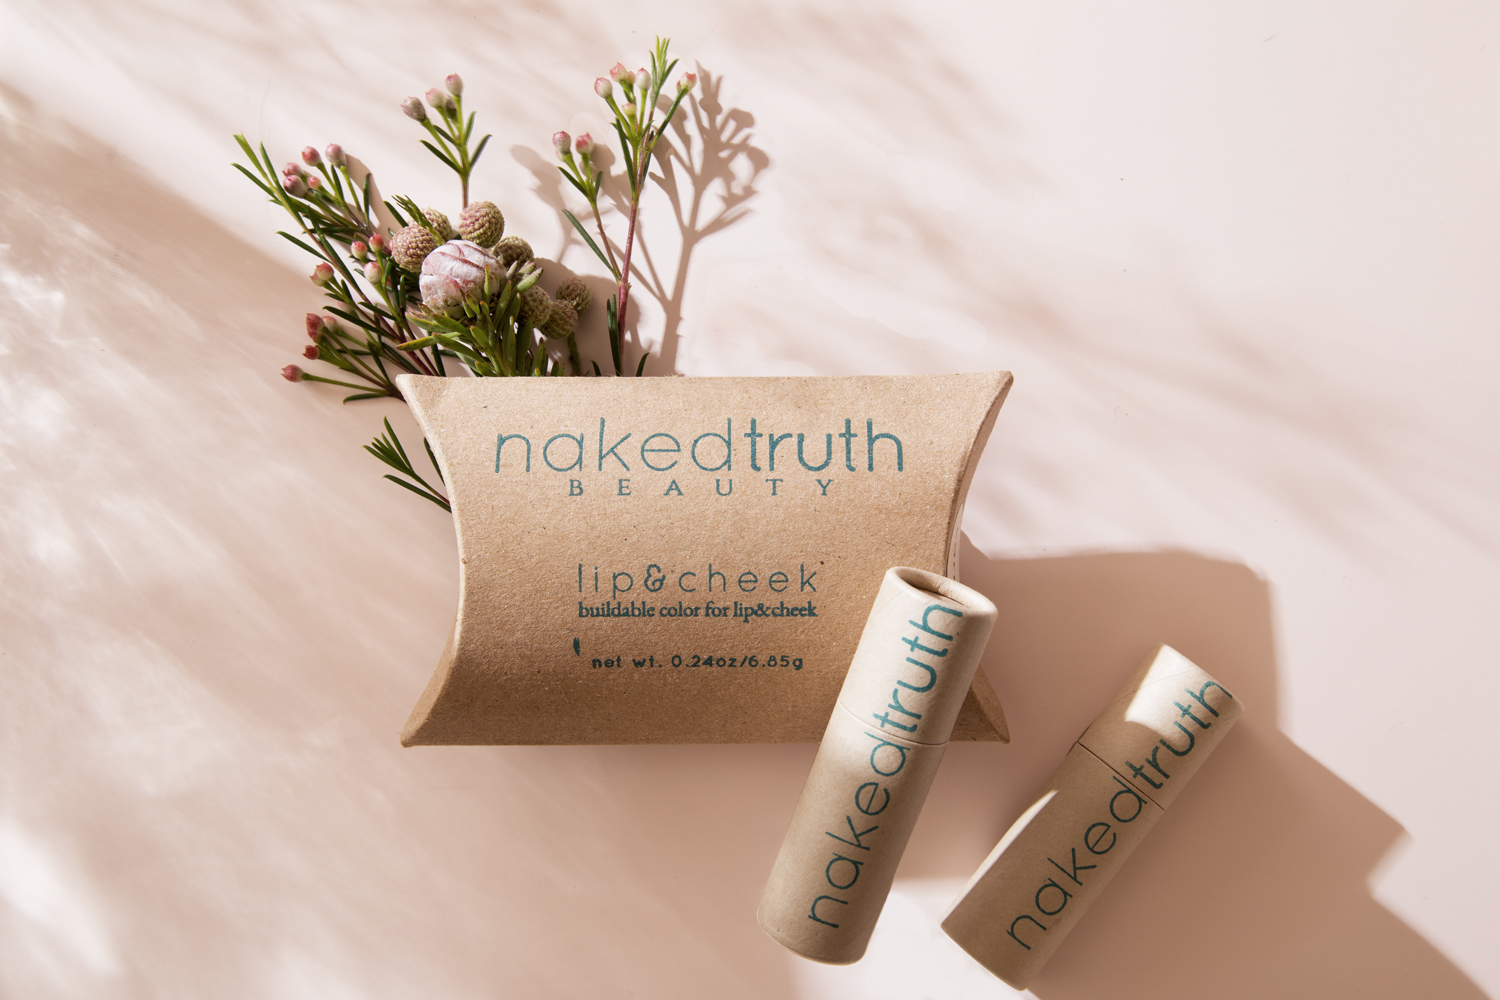 Clean beauty with biodegradable packaging